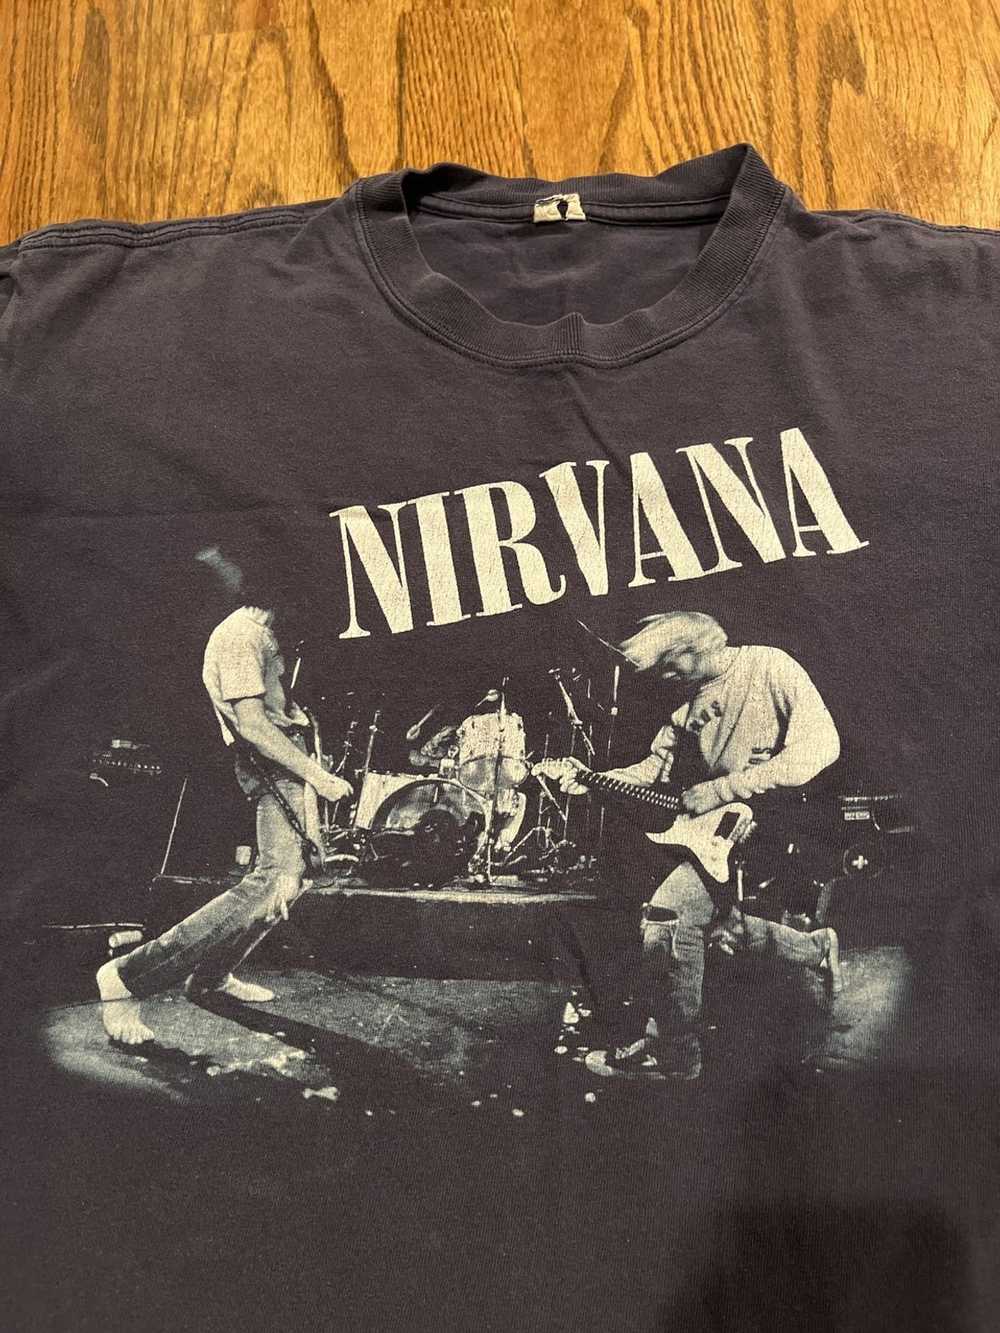 Vintage Nirvana shirt purchased at concert in ear… - image 2